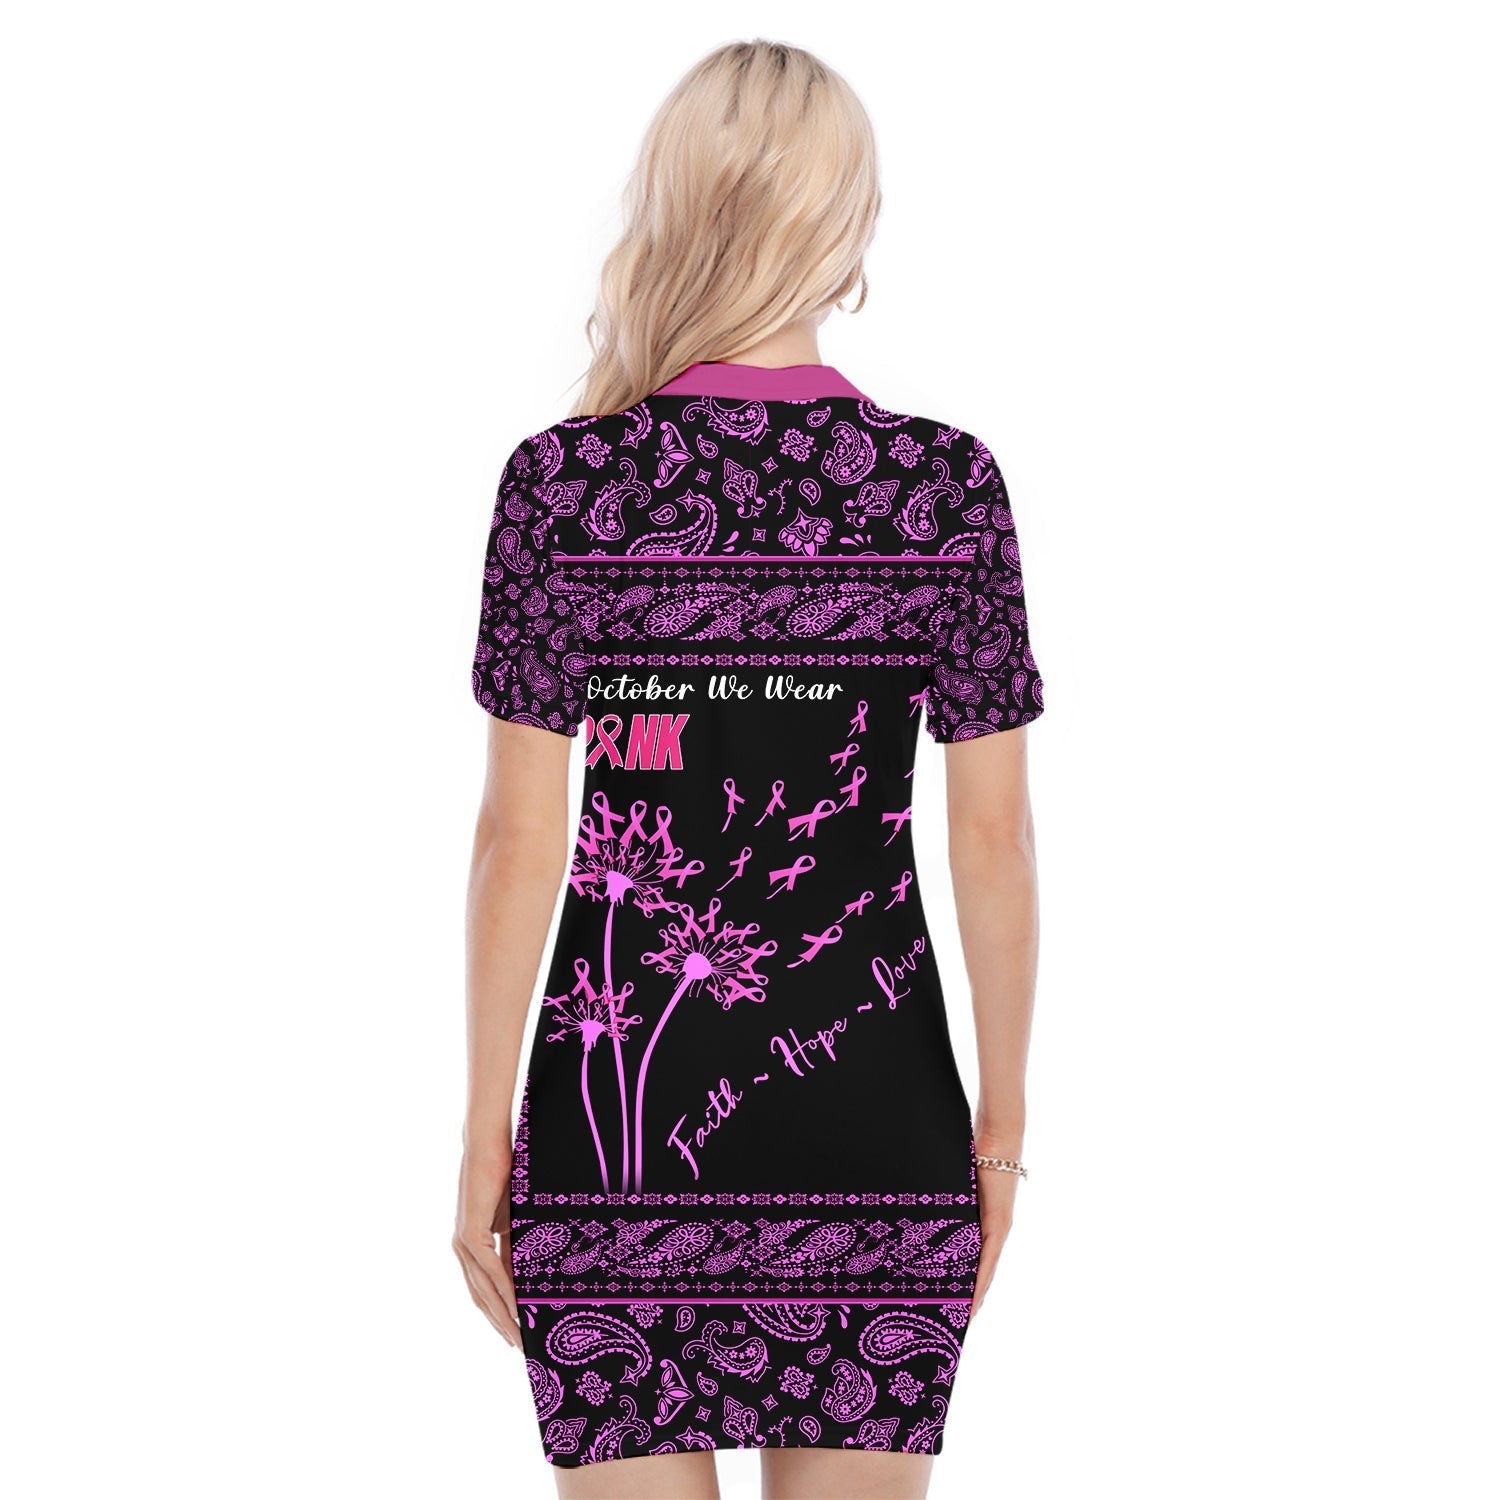 custom-personalised-breast-cancer-polo-dress-black-paisley-pattern-in-october-we-wear-pink